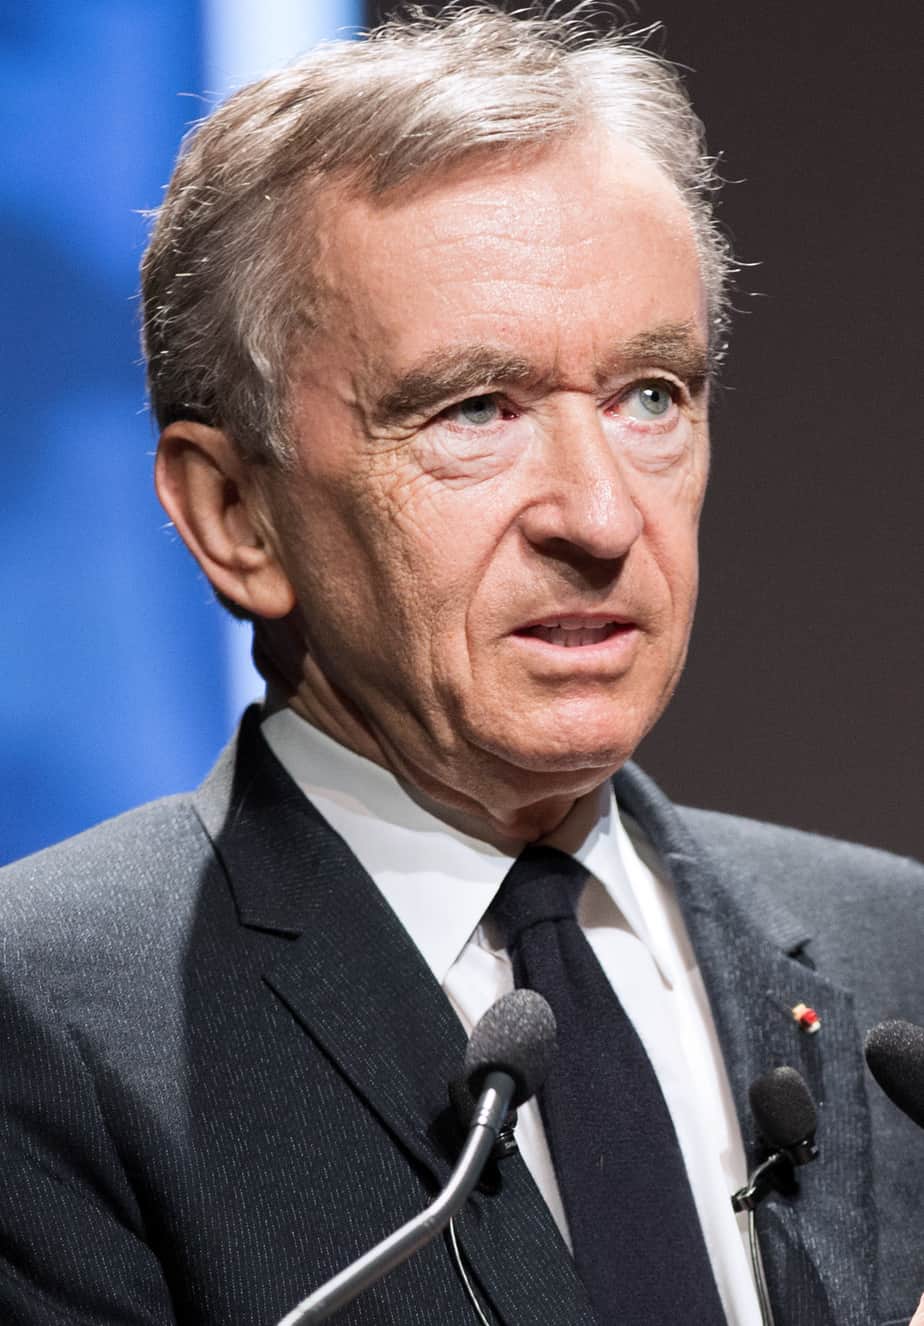 Bernard Arnault in a conference at Ecole Polytechnique